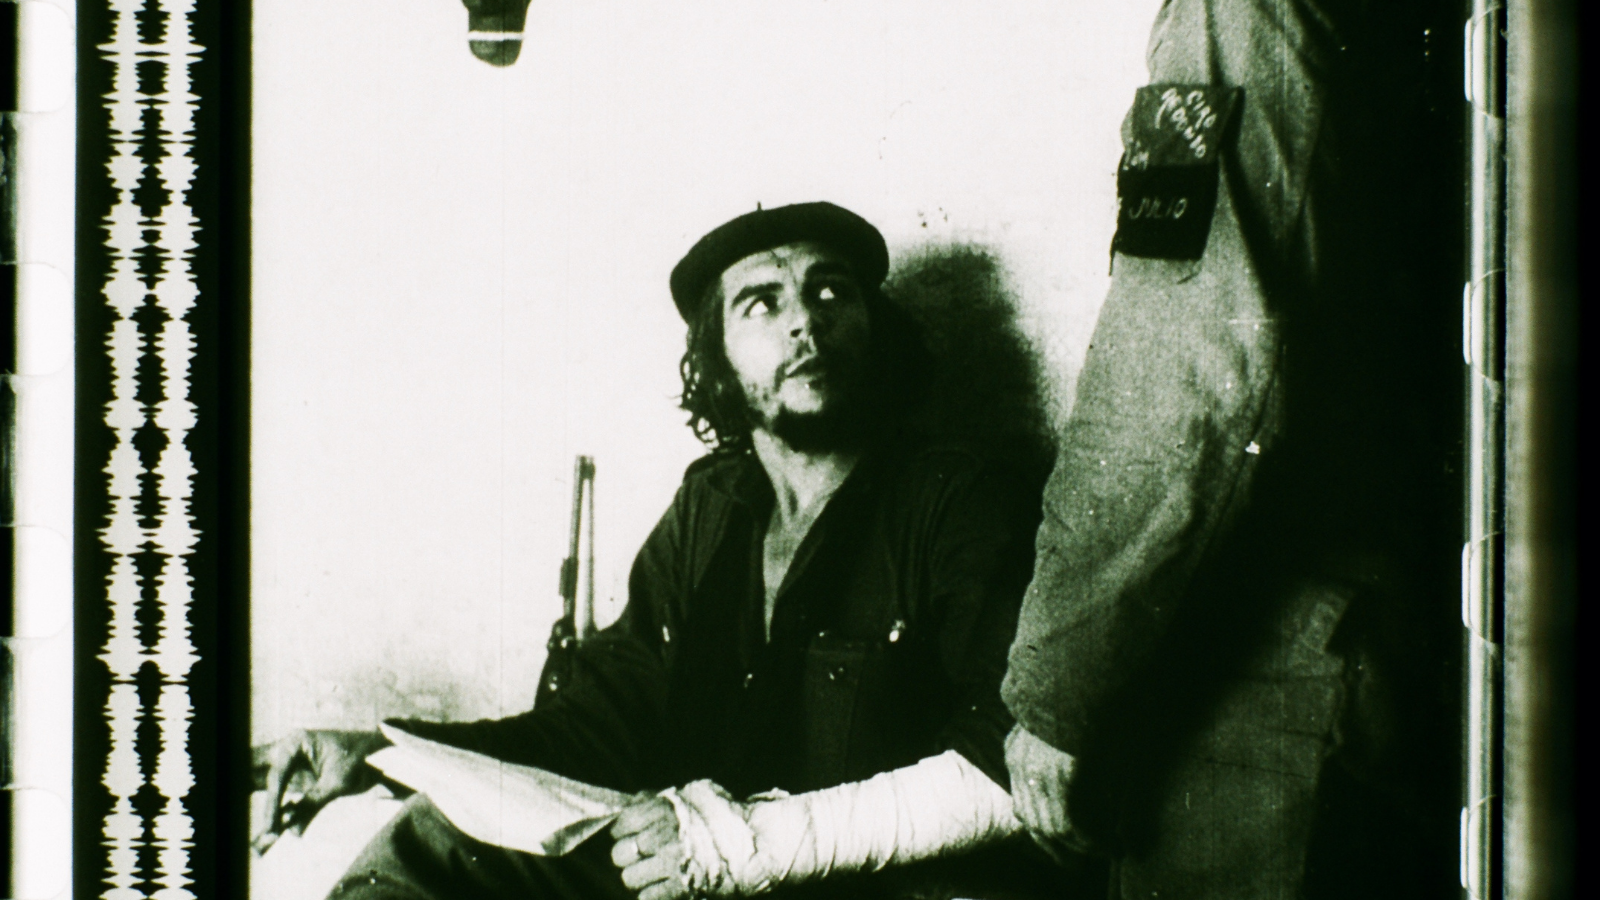 A still from Santiagi Álvarez. It is black and white and shows a man in a beret, seated, looking up at another man in uniform.